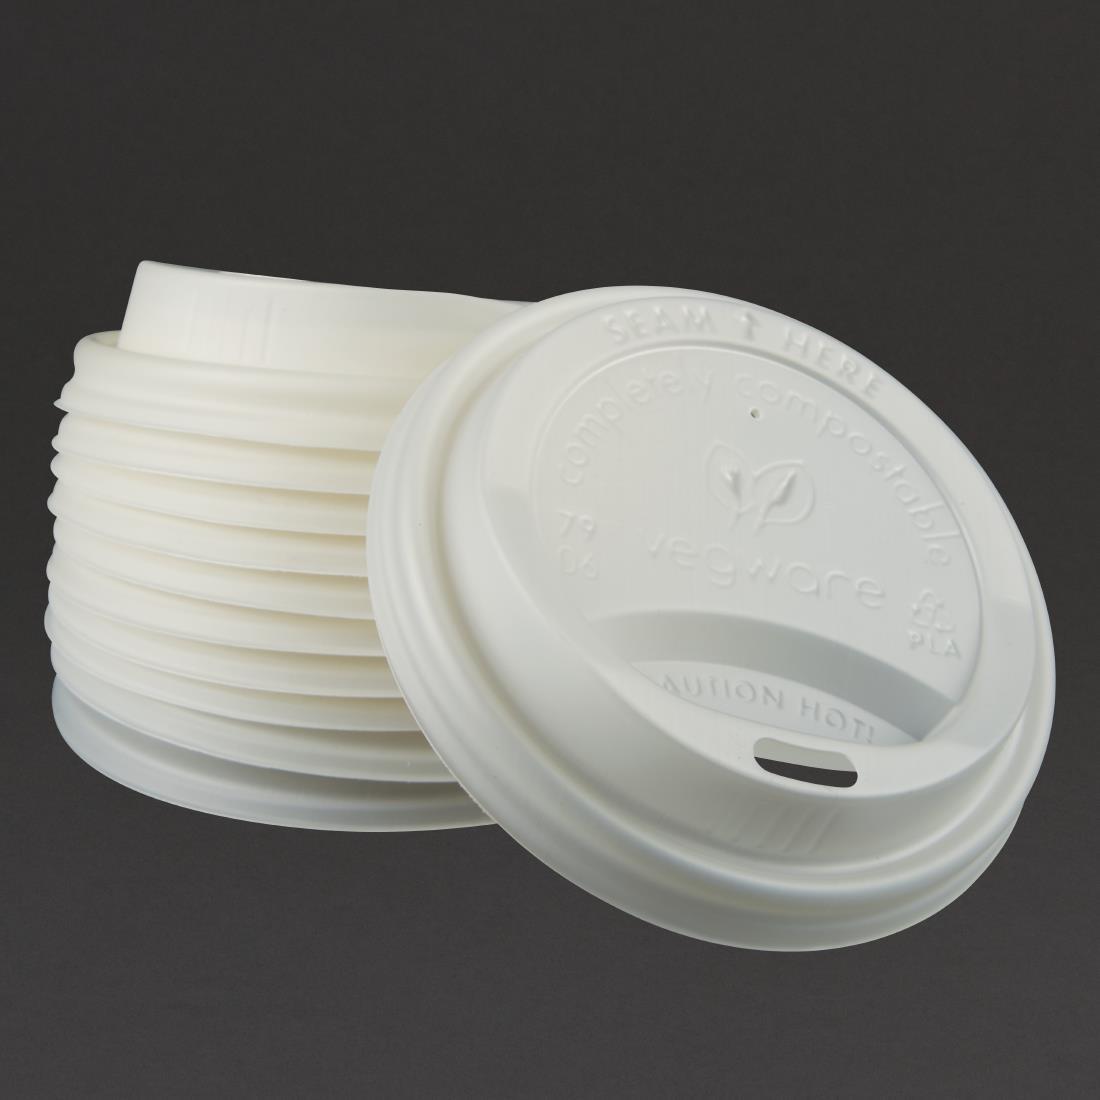 Vegware Compostable Coffee Cup Lids 225ml / 8oz (Pack of 1000) - GH024  - 4